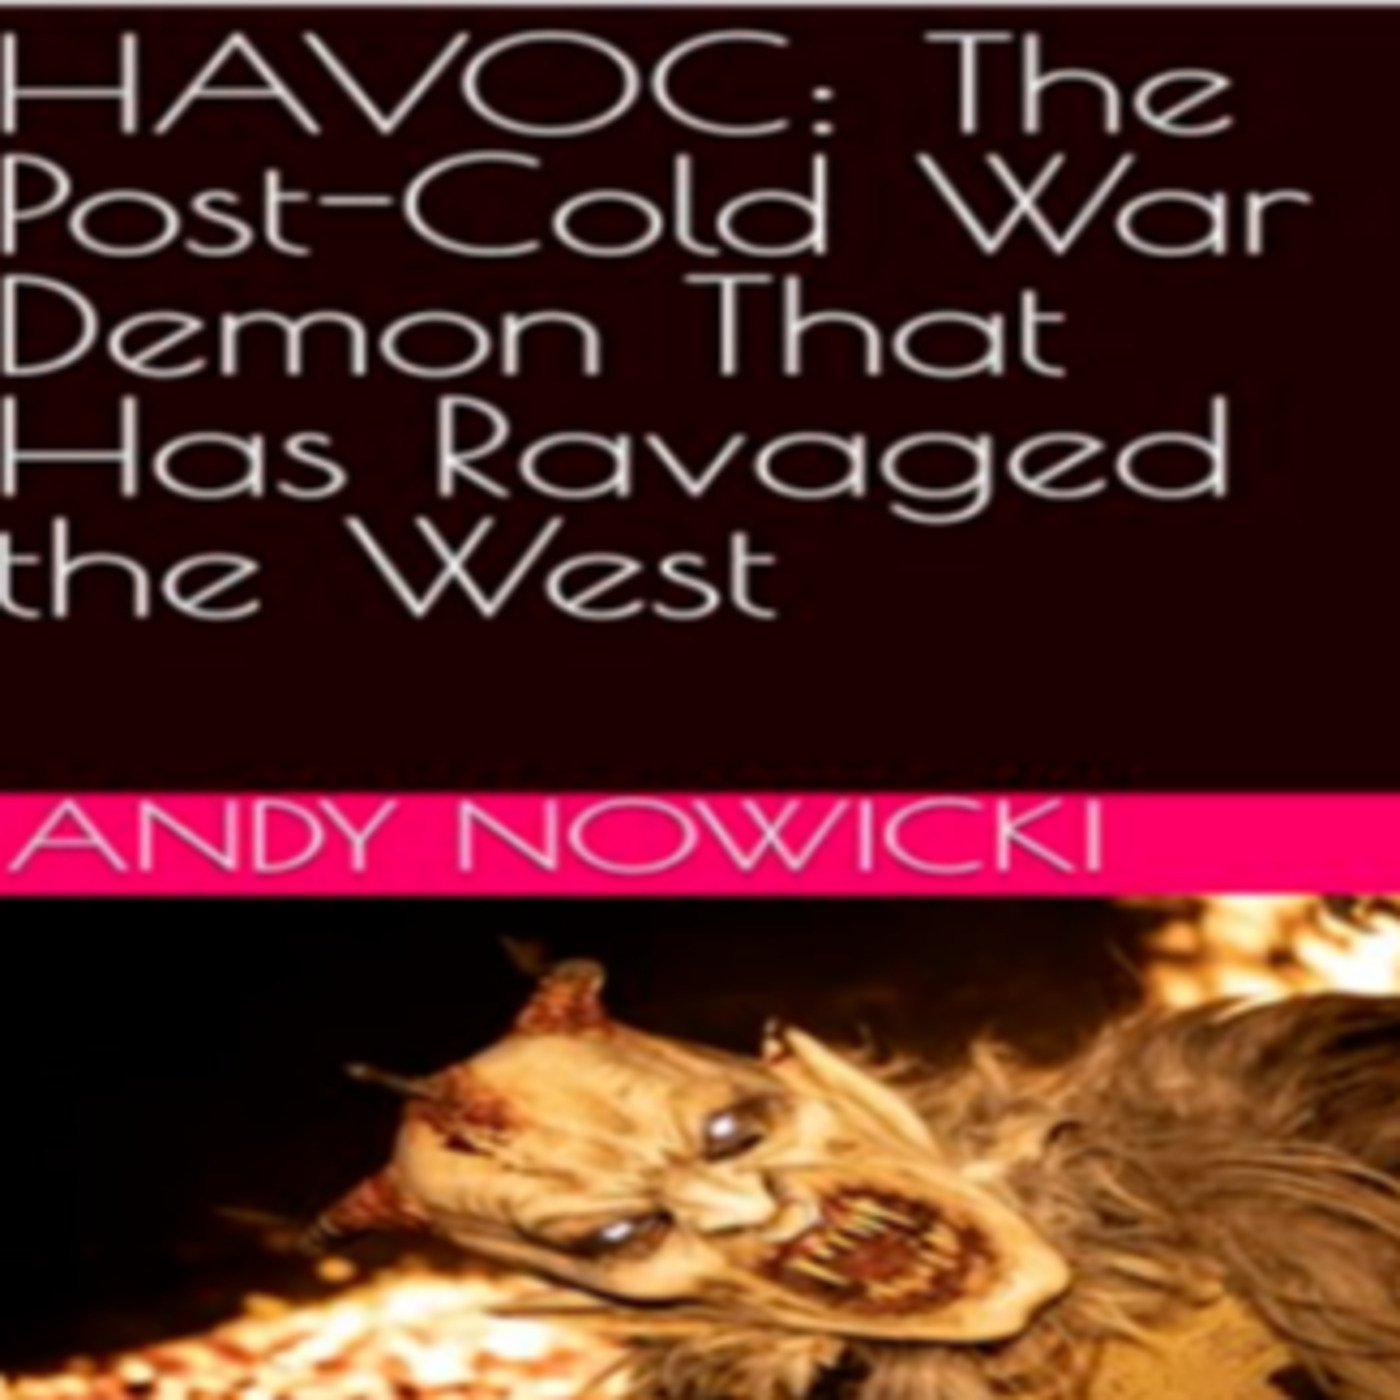 Episode 468: Andy Nowicki on America's Post-Cold War Demons